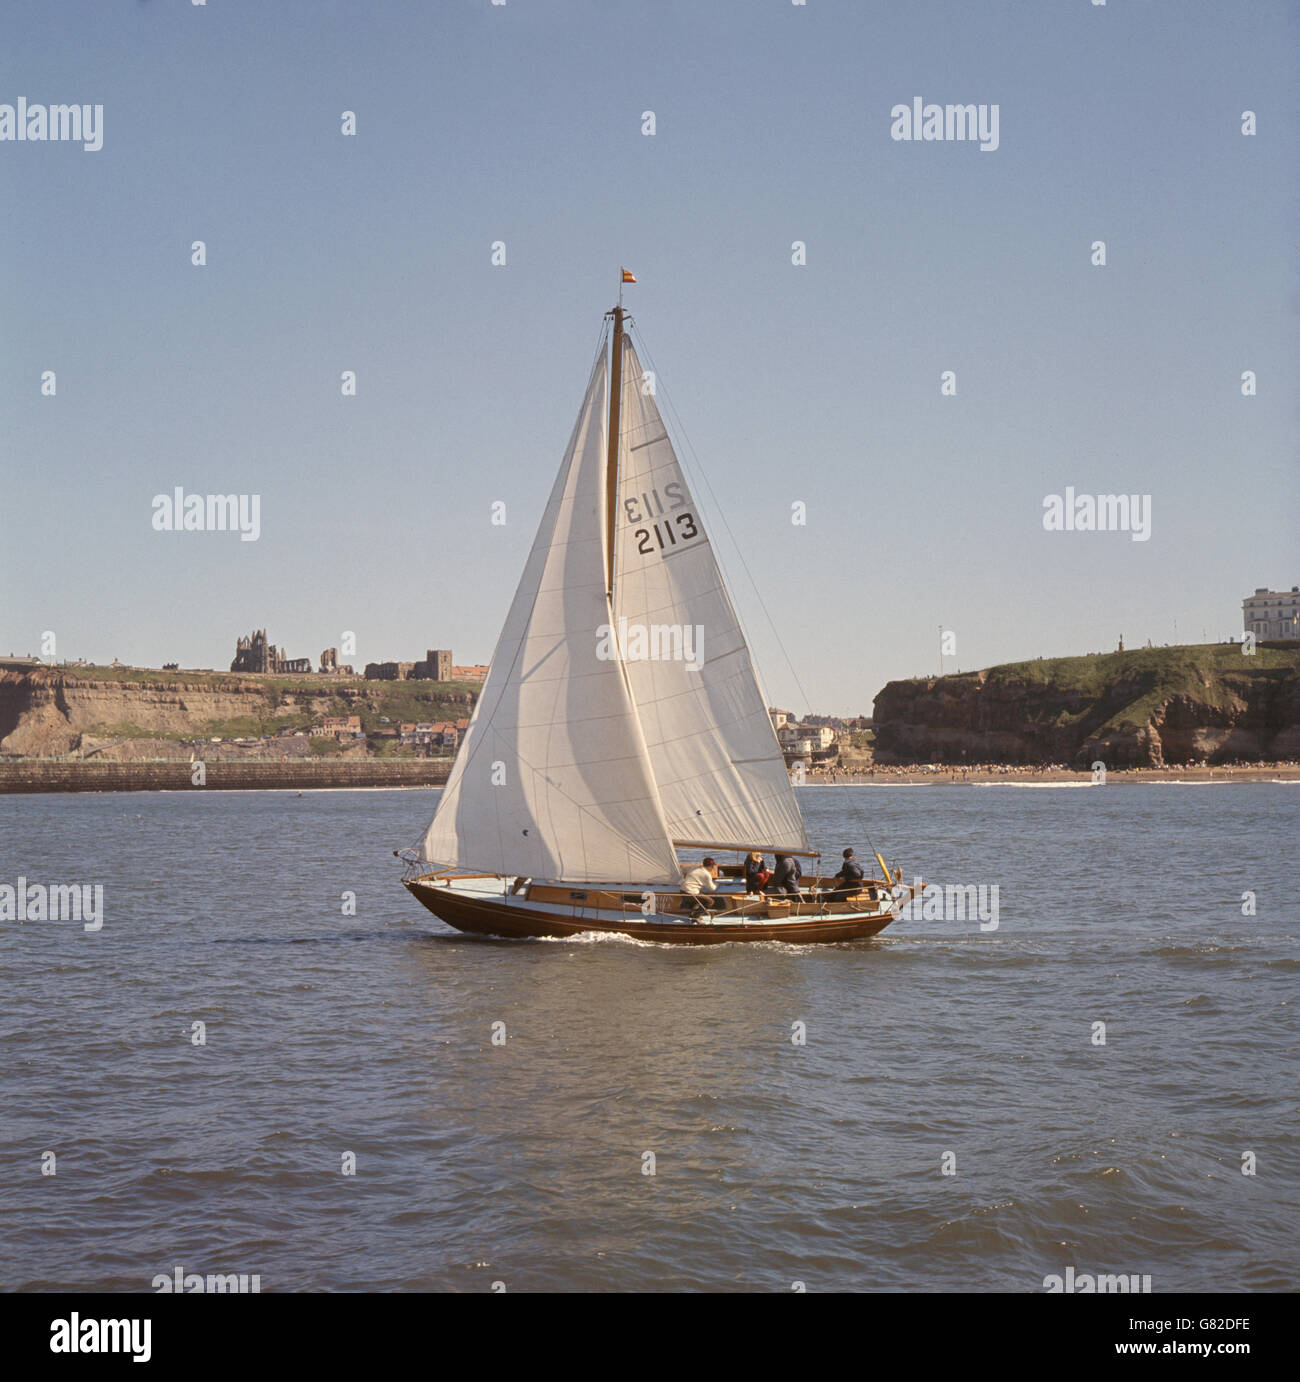 Yachting at Whitby. Blue skies and sunshine for yachtsmen at Whitby, Yorkshire, where craft are seen in a race organised by Whitby Yacht Club. Stock Photo